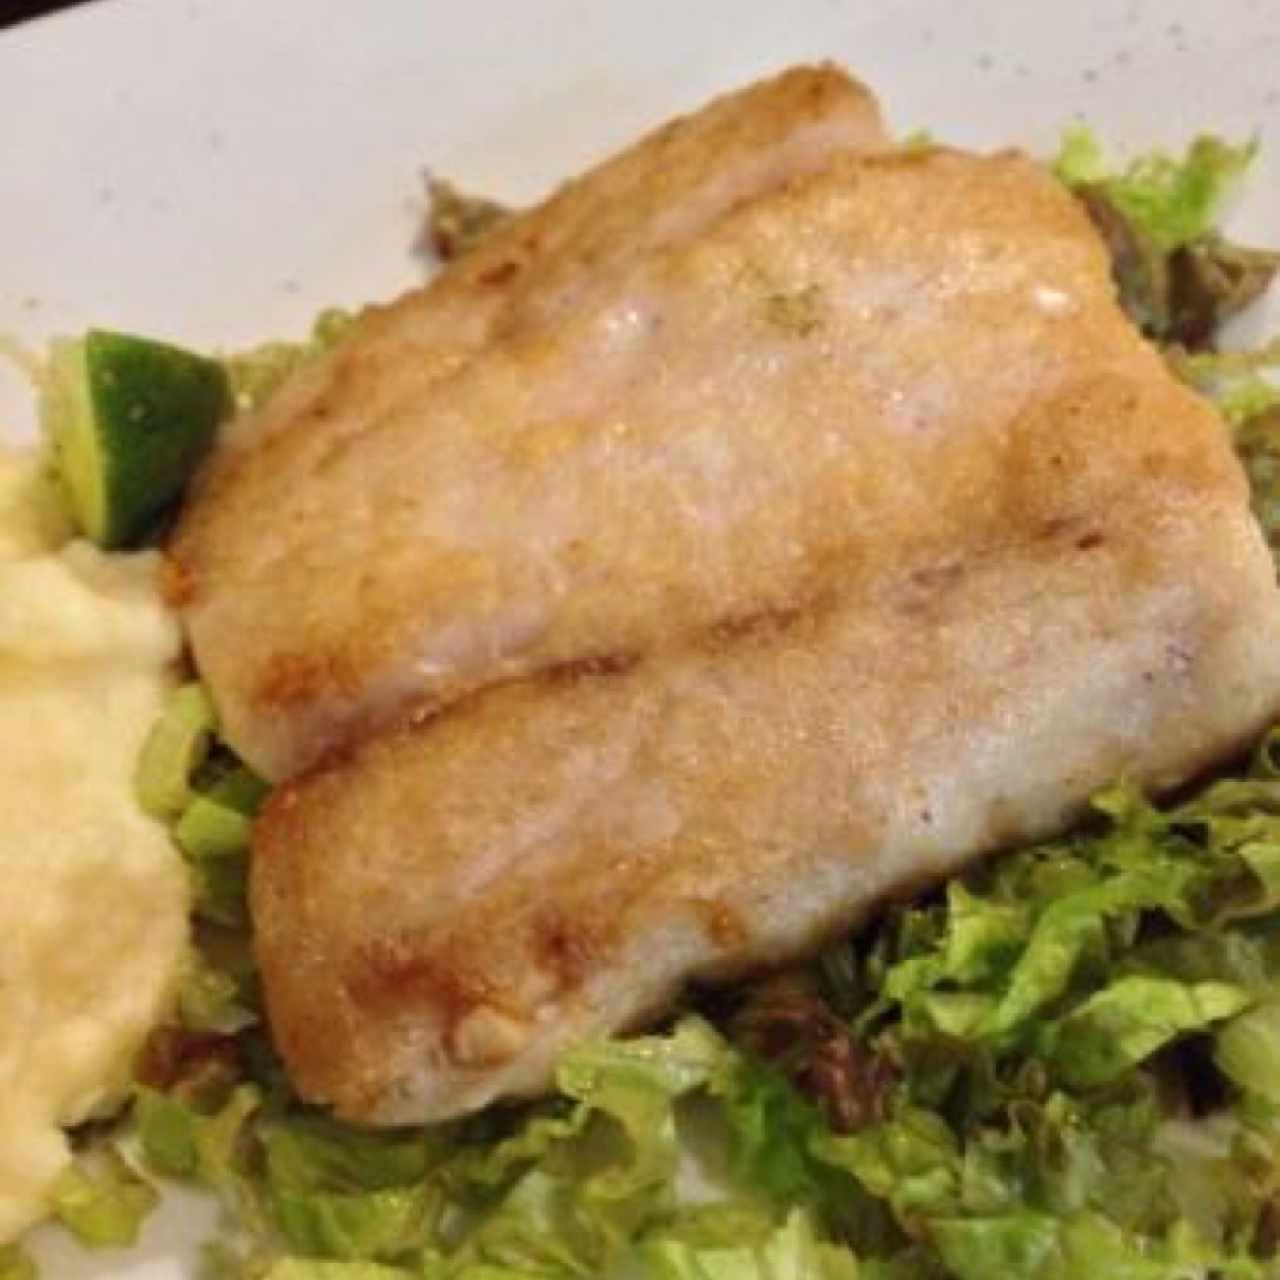 grilled Corvina and mashed potatoes